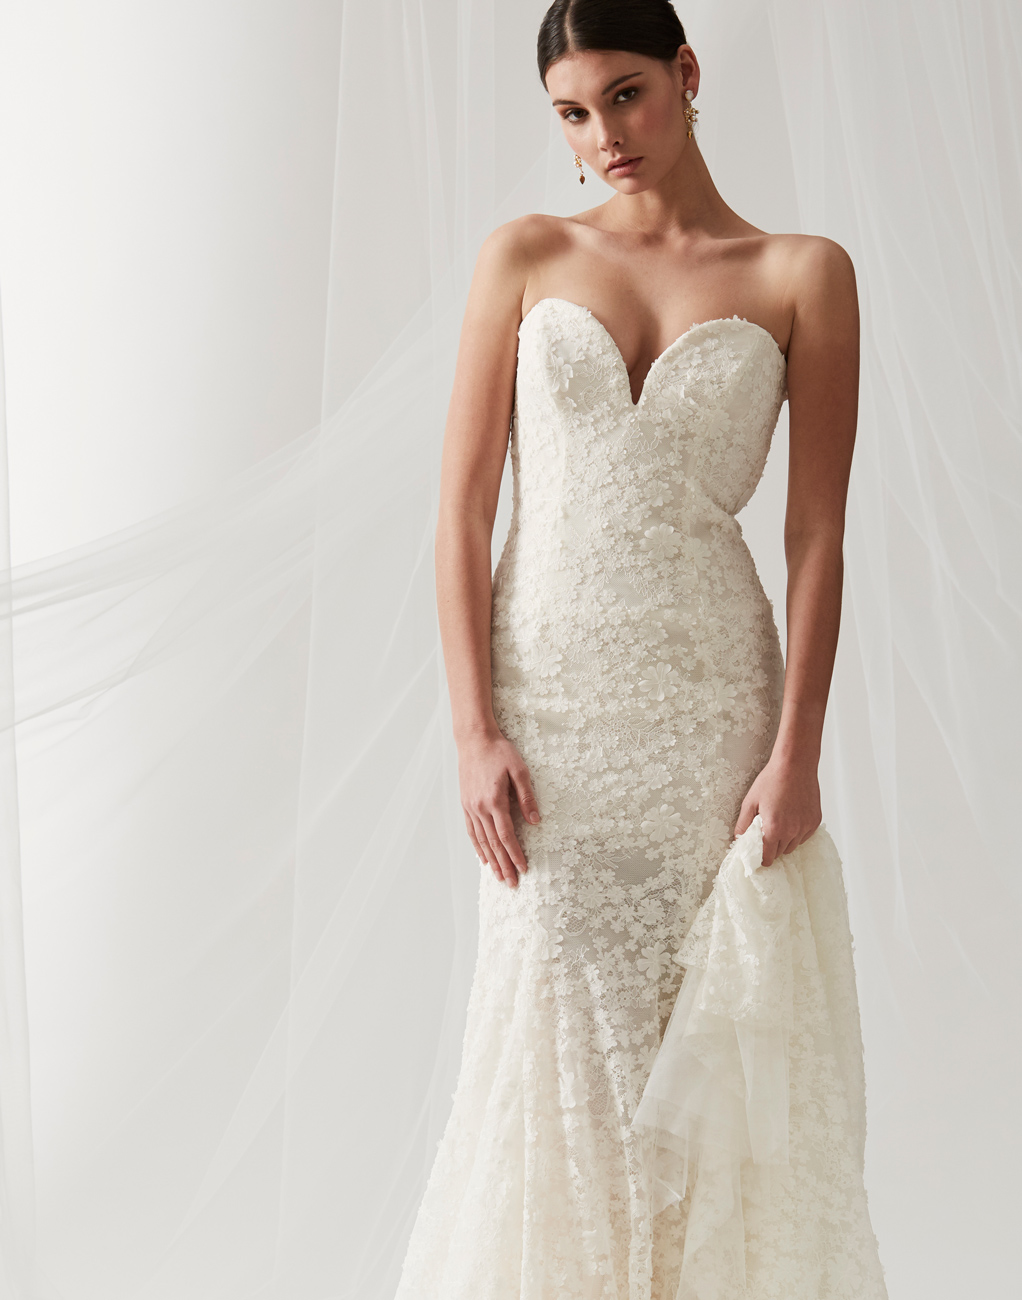 Muse Bridal Gown